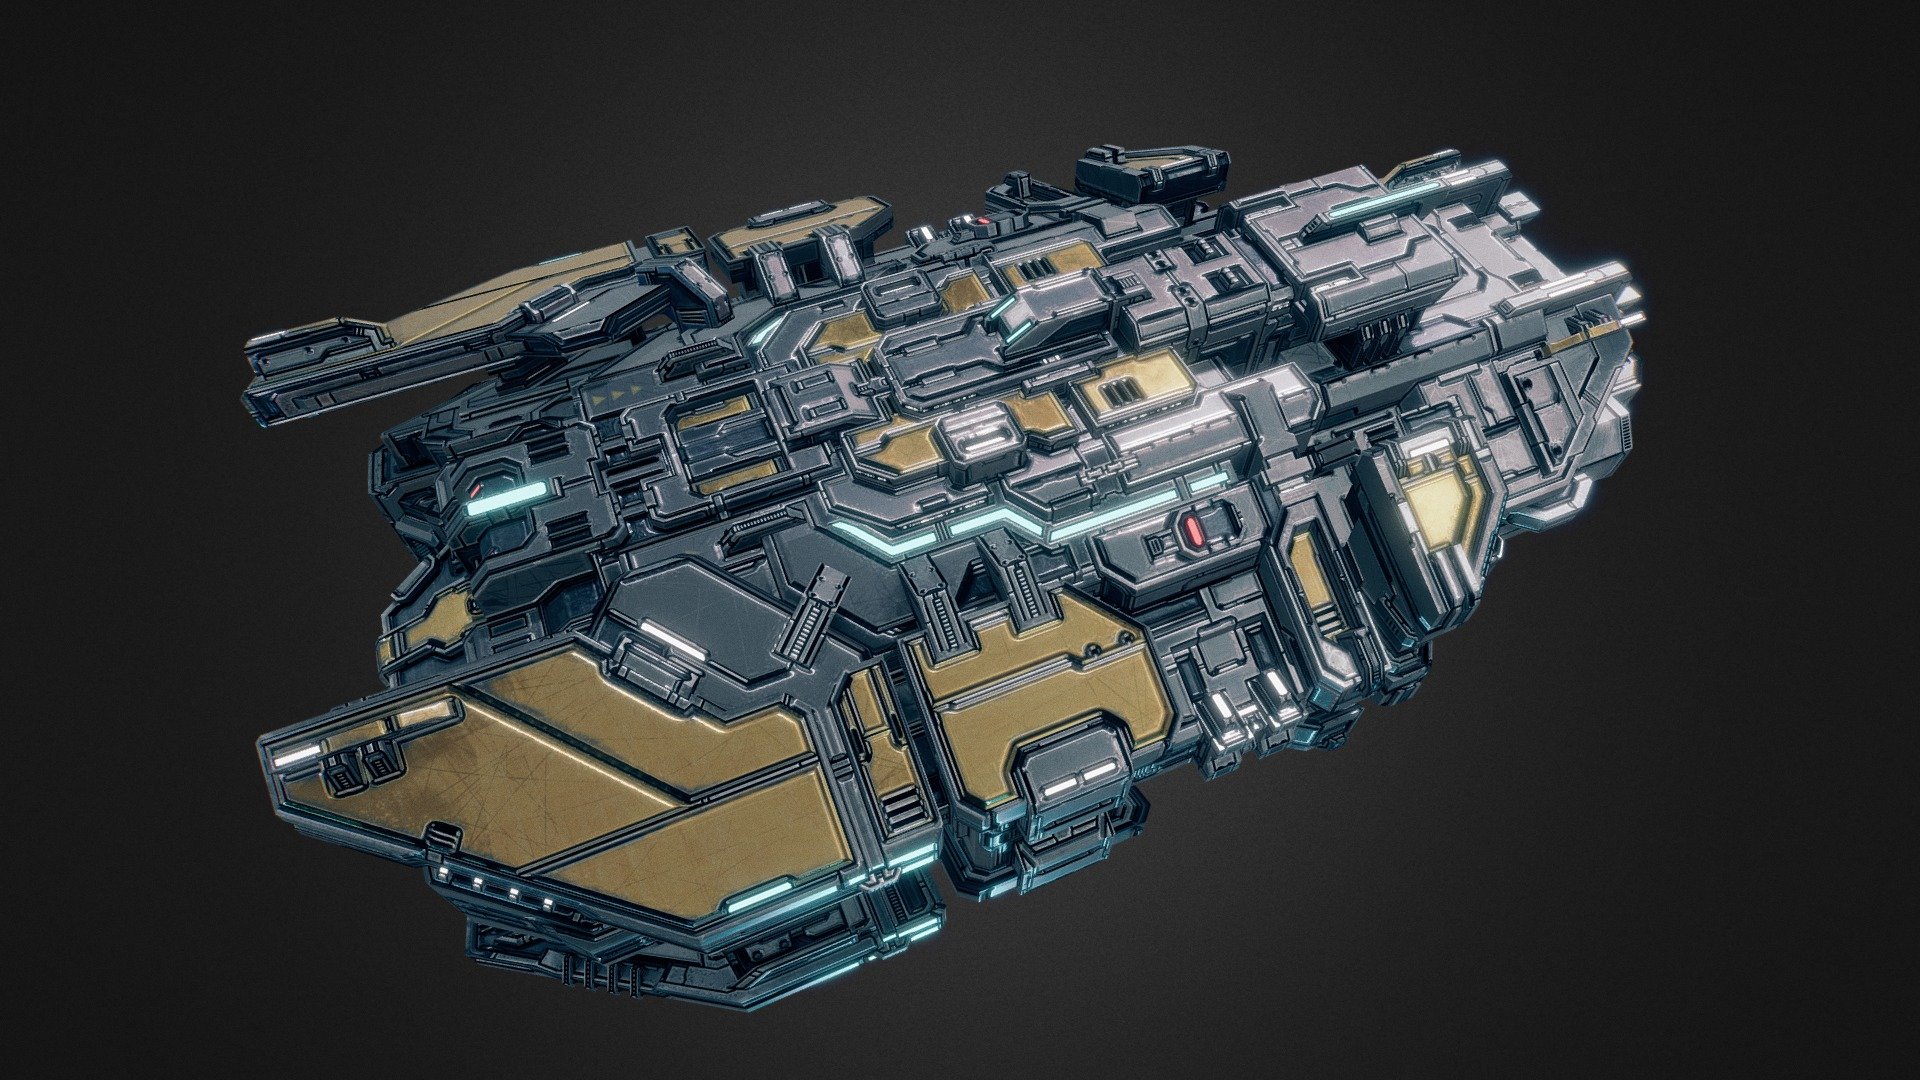 In-game model of a large spaceship belonging to the Eclipse faction. Learn more about the game at http://starfalltactics.com/ - Starfall Tactics — Nomad Eclipse dreadnought - 3D model by Snowforged Entertainment (@snowforged) 3d model